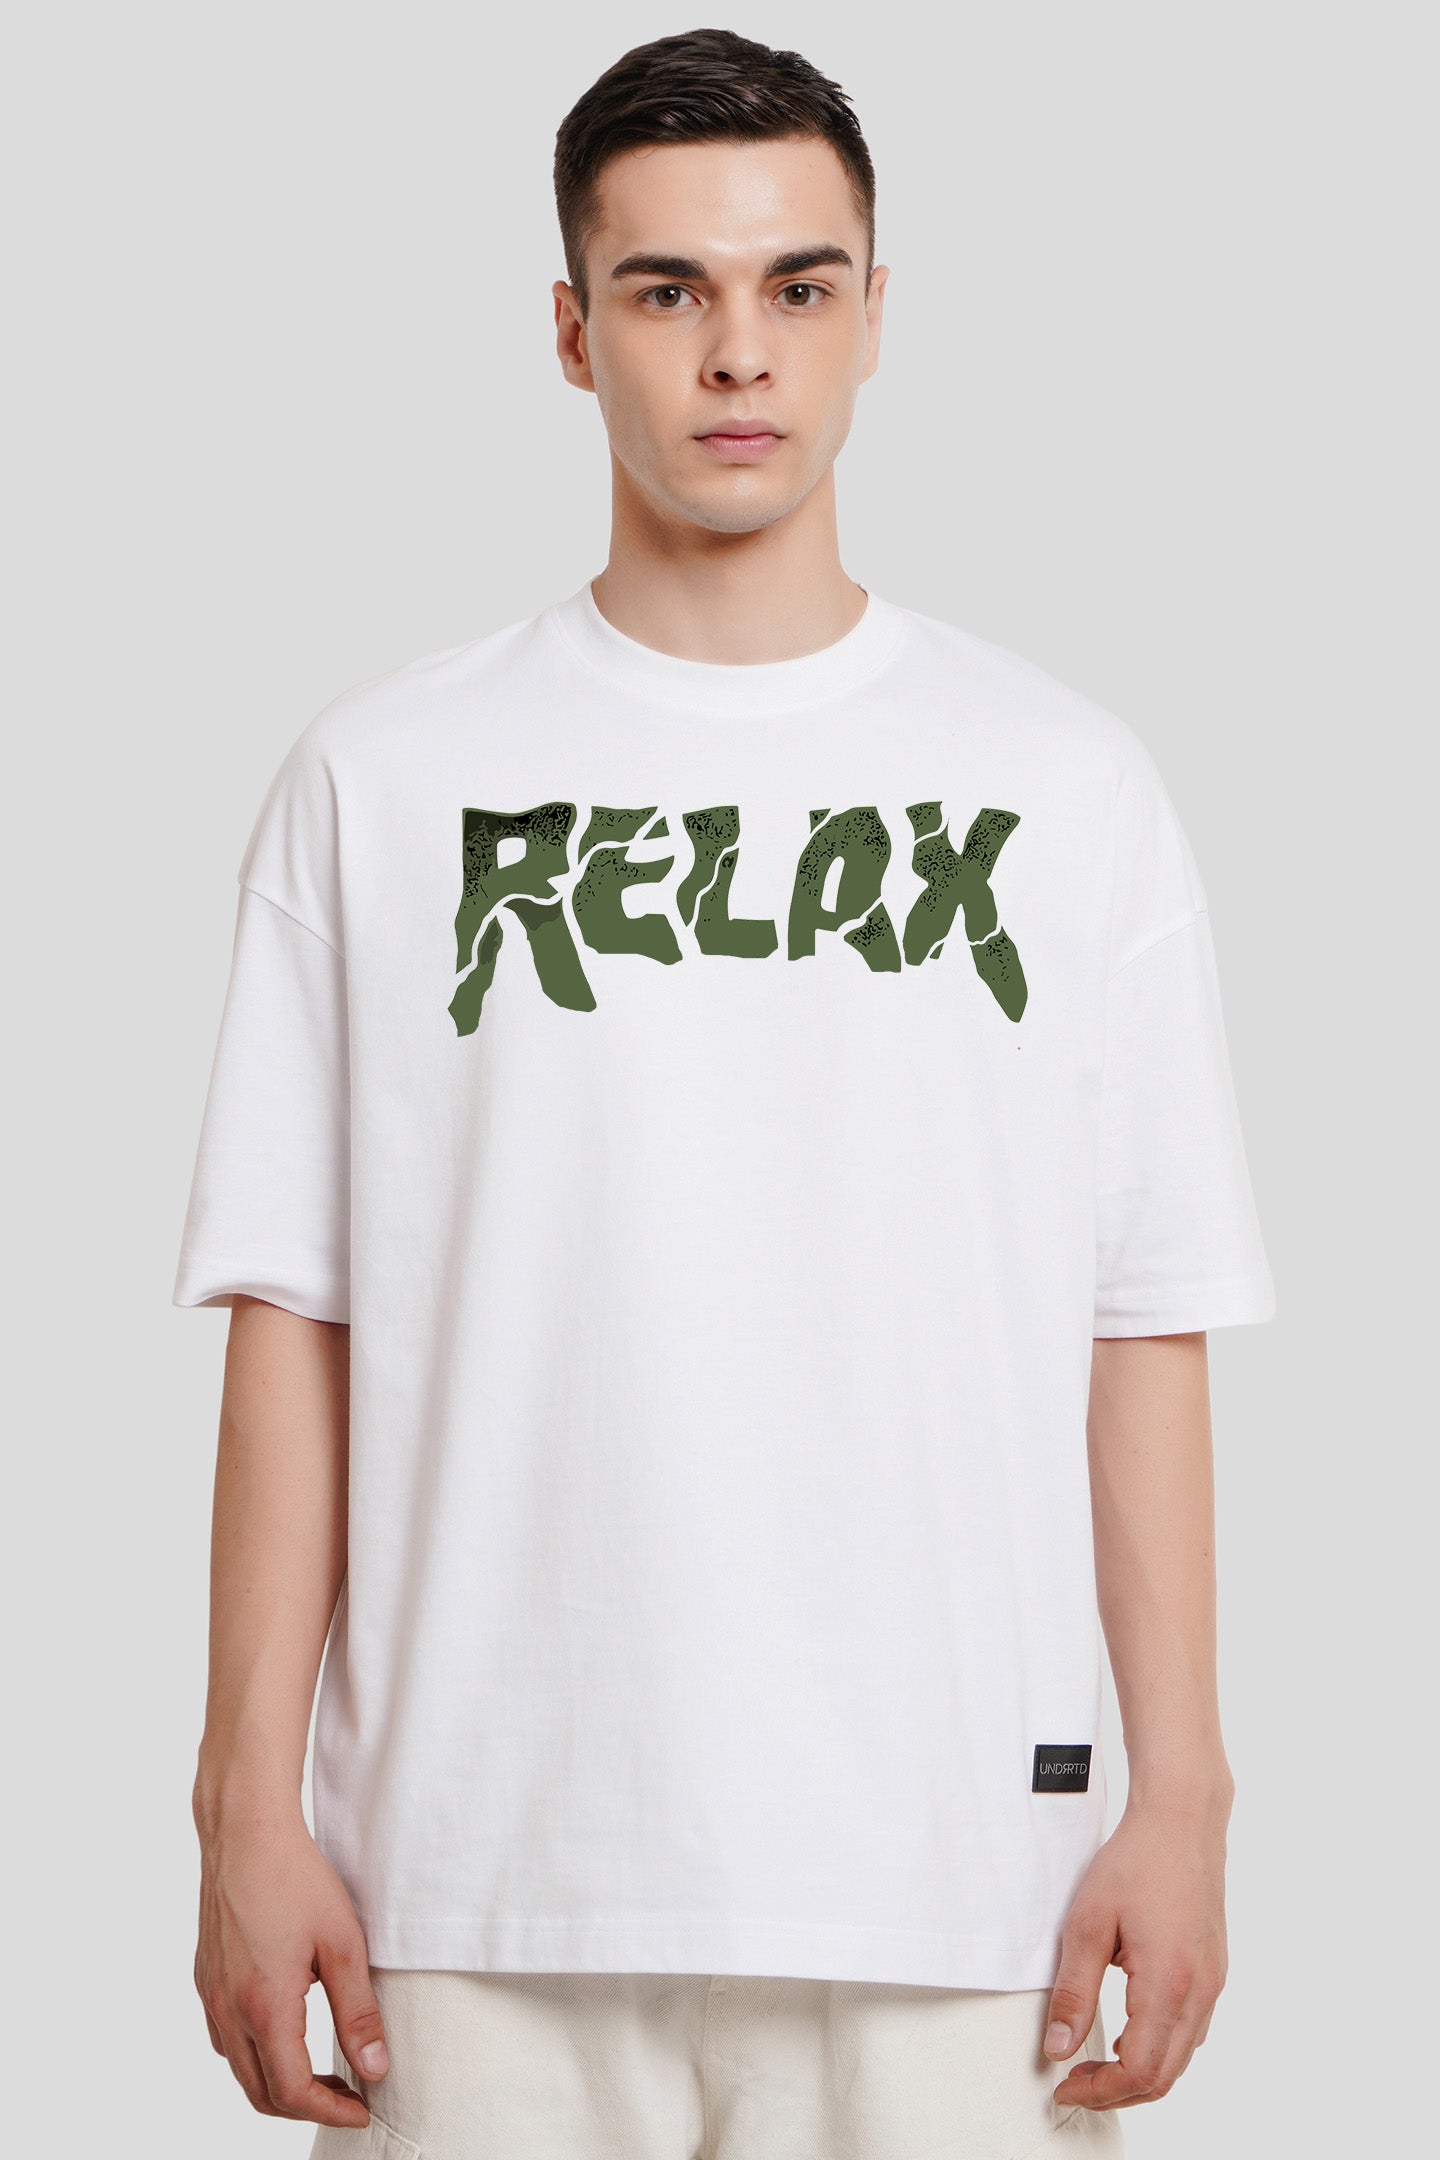 Relax White Printed T Shirt Men Baggy Fit With Front And Back Design Pic 1